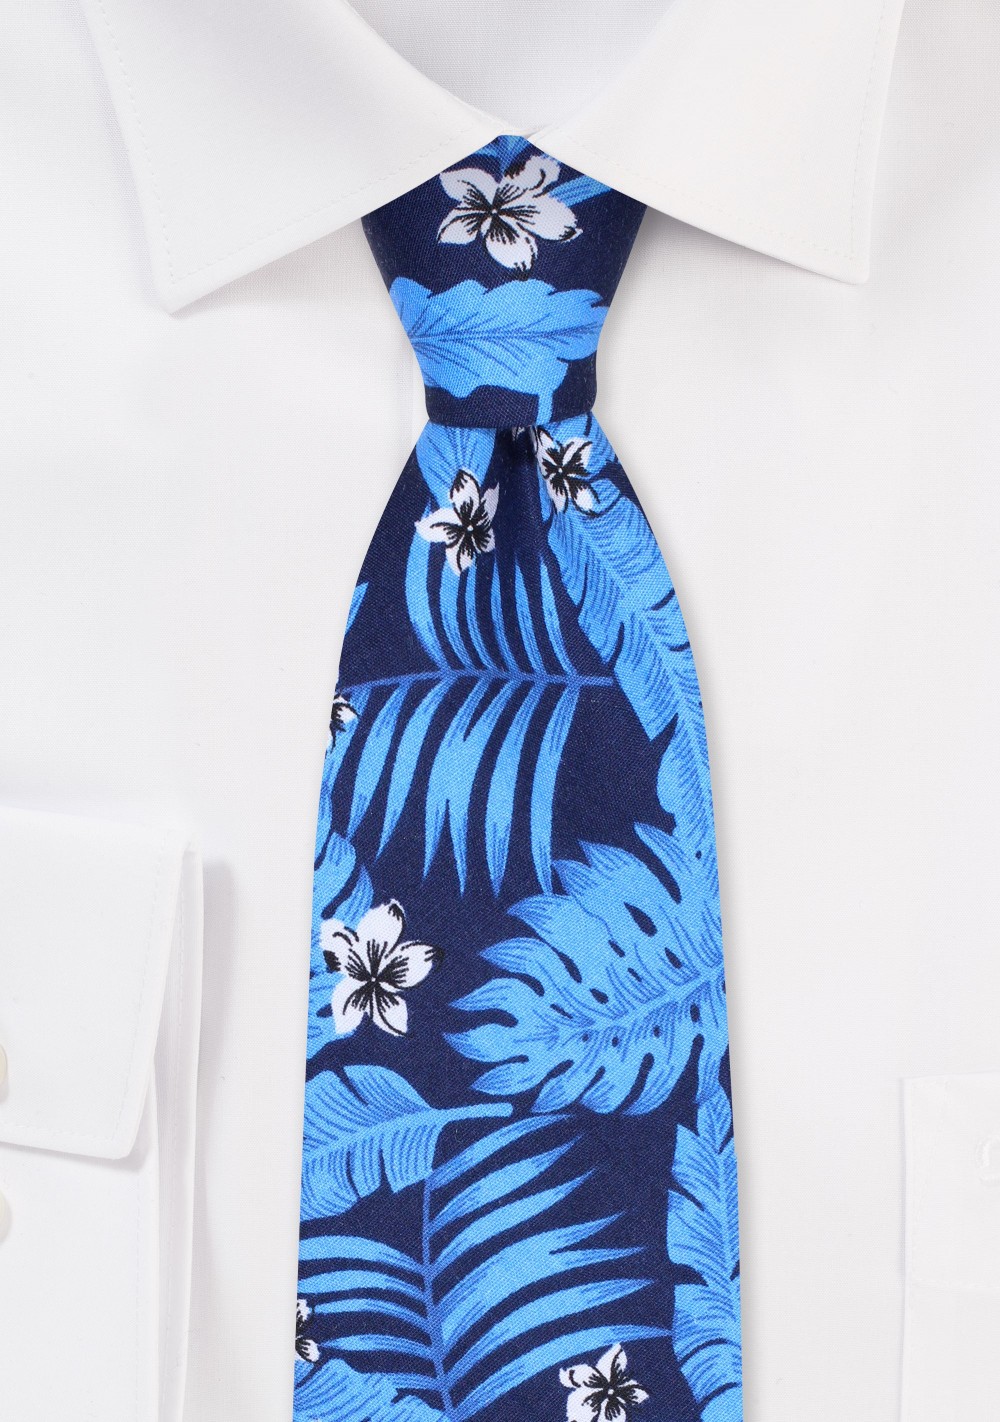 Tropical Floral Print Tie in Blues